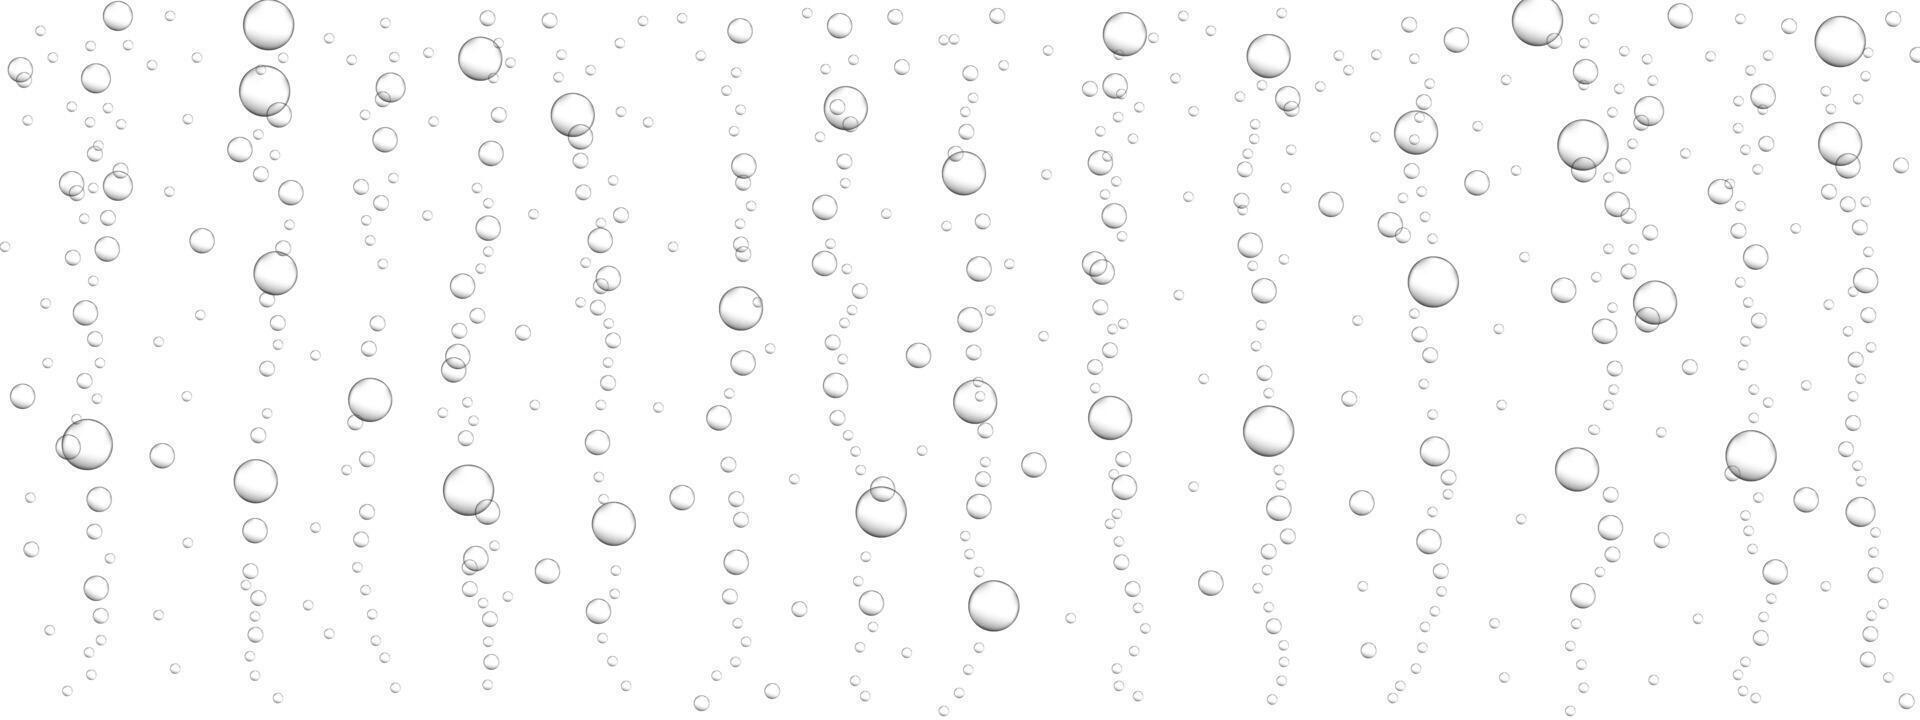 Transparent bubbles background. Fizzy drink, carbonated water, seltzer, beer, soda, champagne or sparkling wine texture. Underwater air stream in ocean, sea or aquarium vector